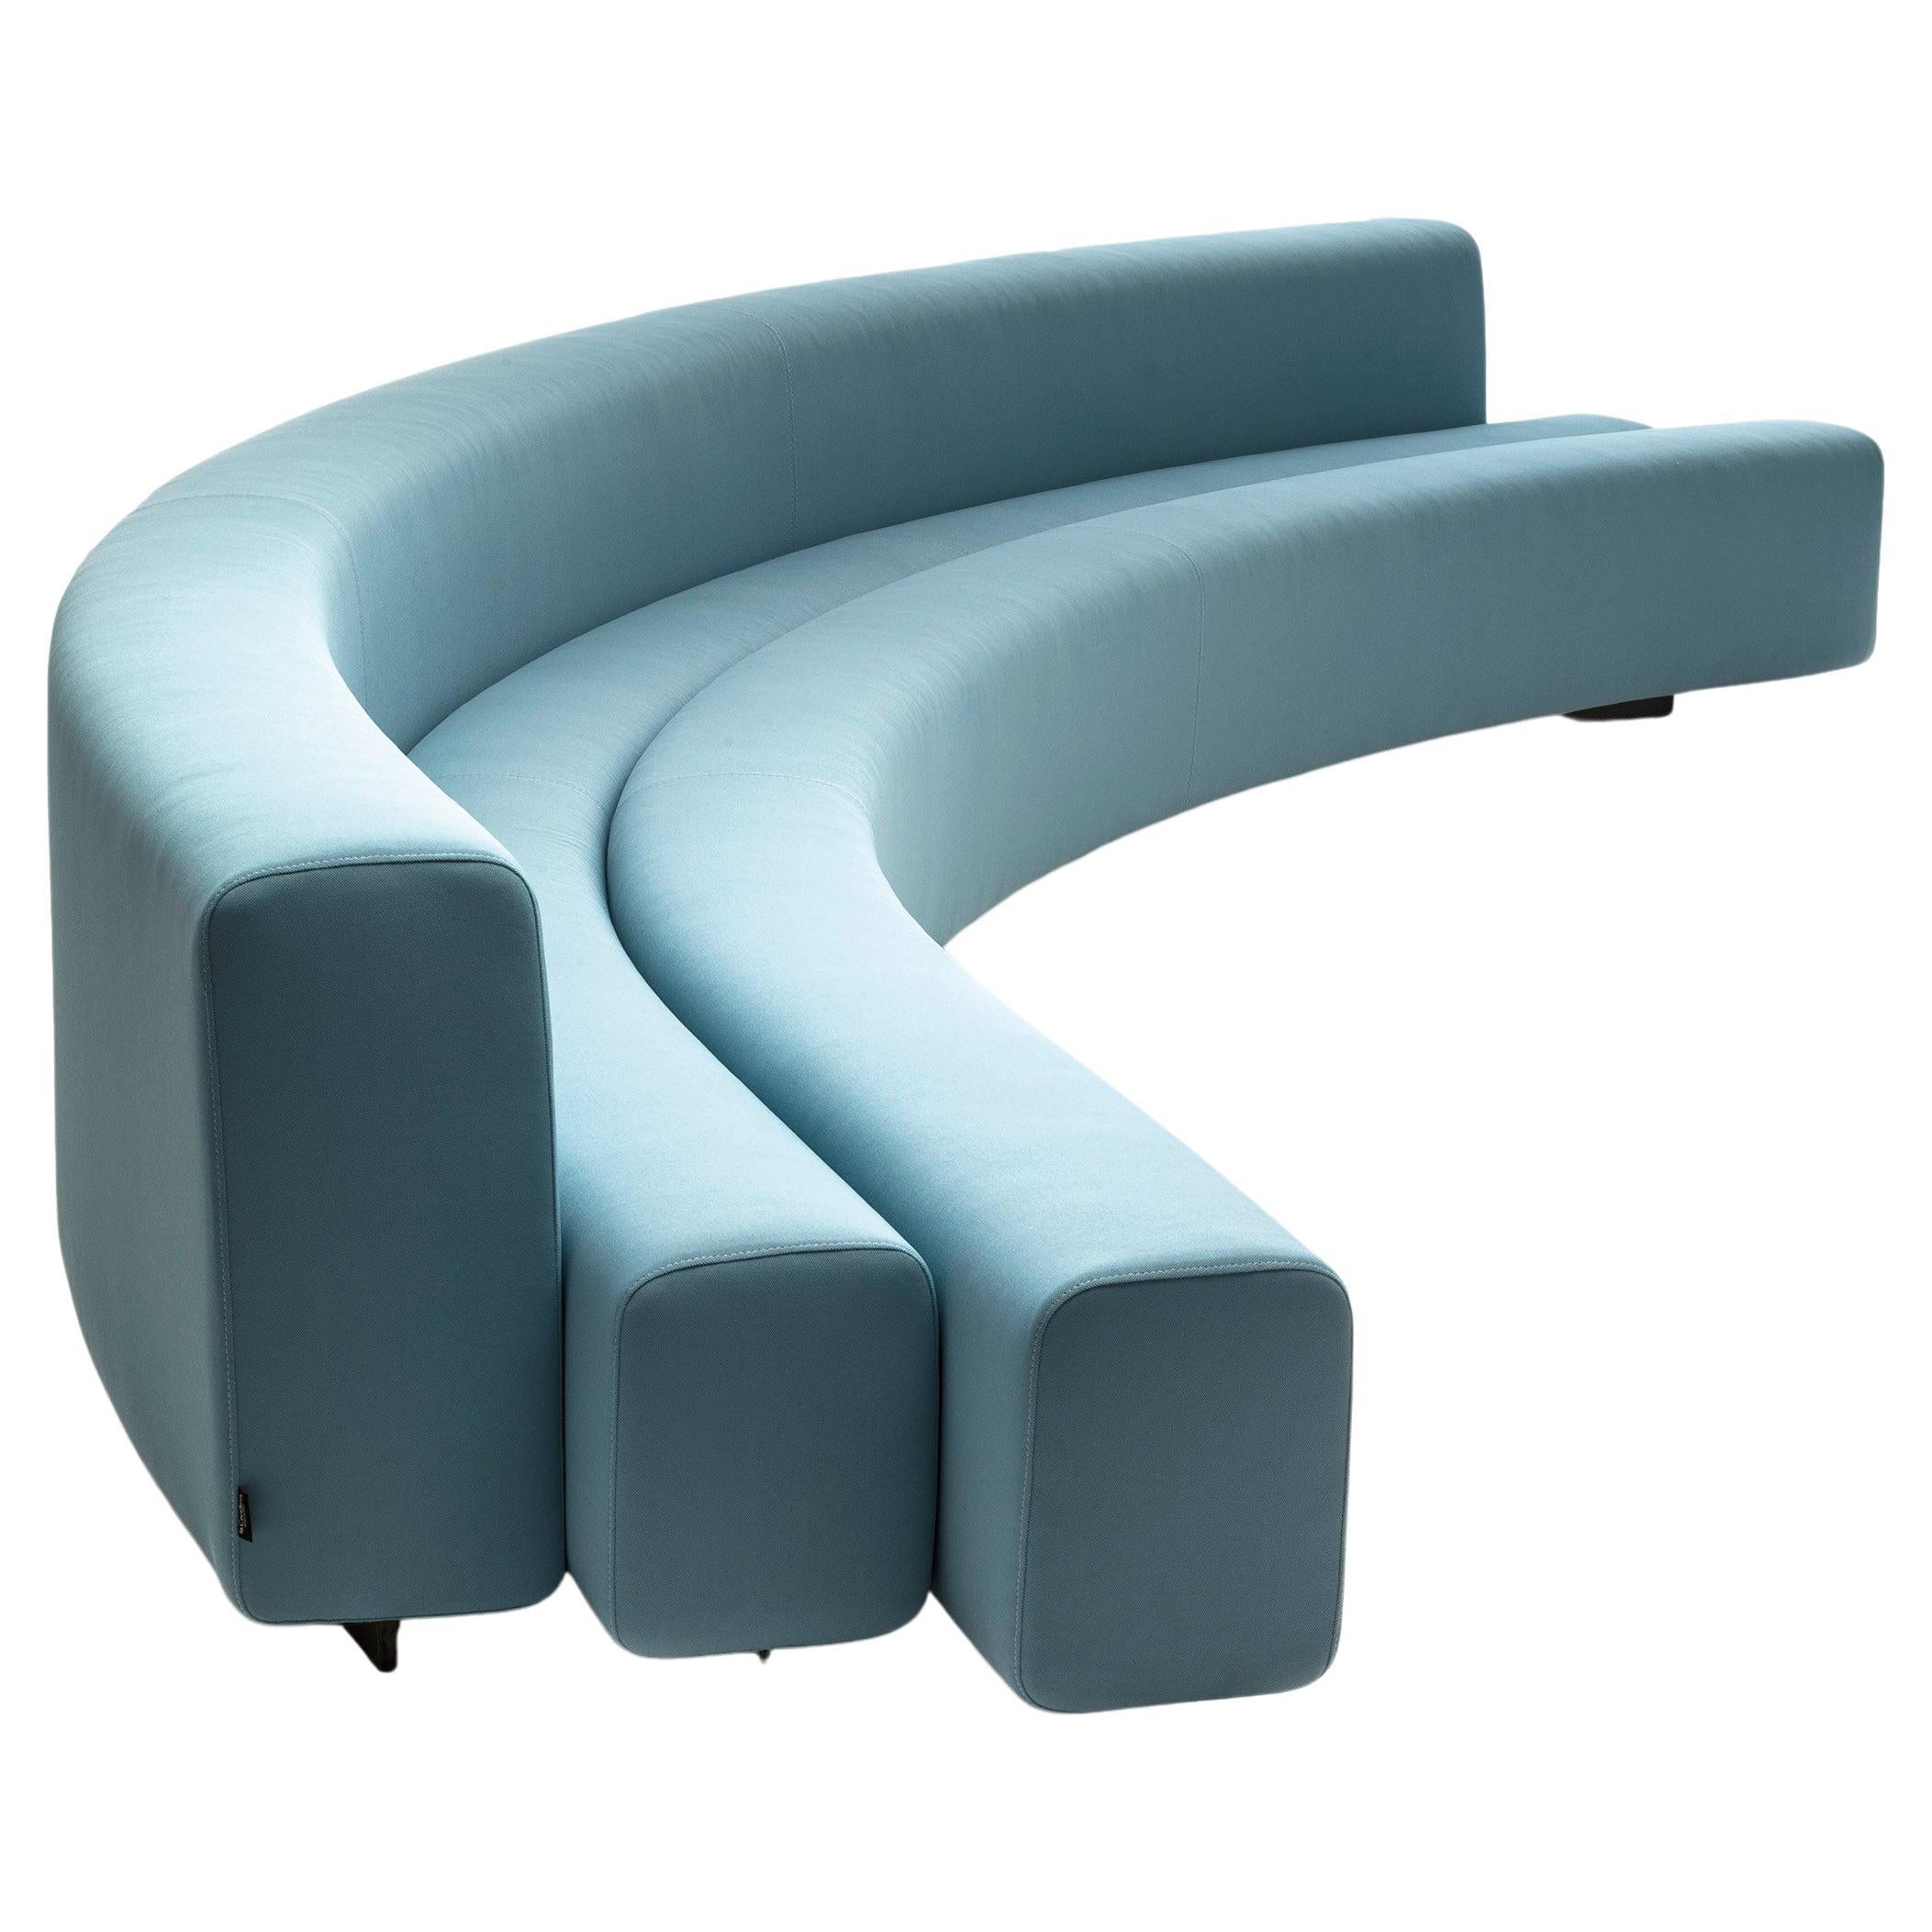 Osaka Large Sofa in Stretchy Blue Upholstery by Pierre Paulin